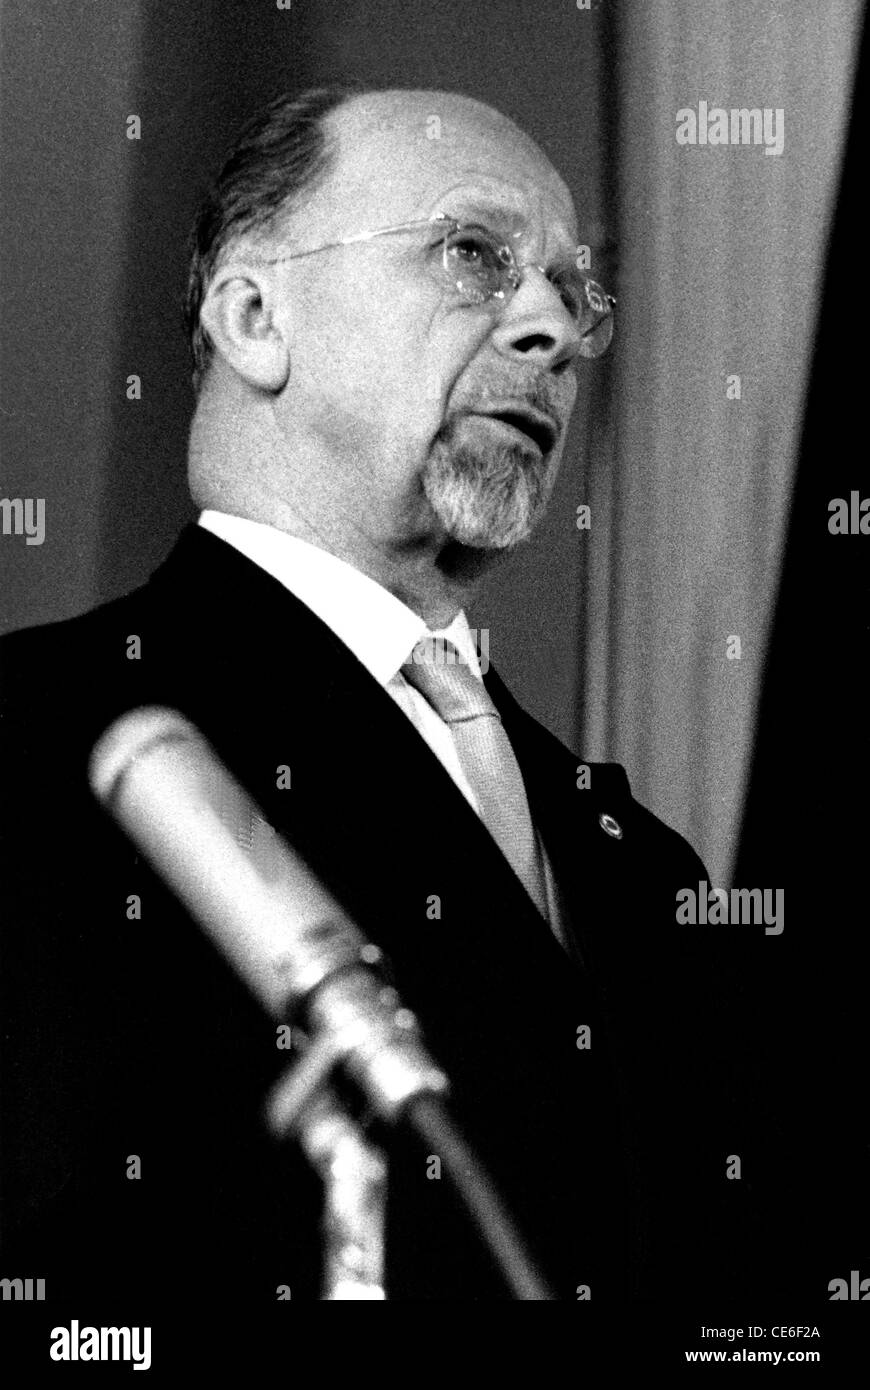 Walter Ulbricht at a Press conference in June 1961 in East Berlin for the making of the Berlin Wall. Stock Photo